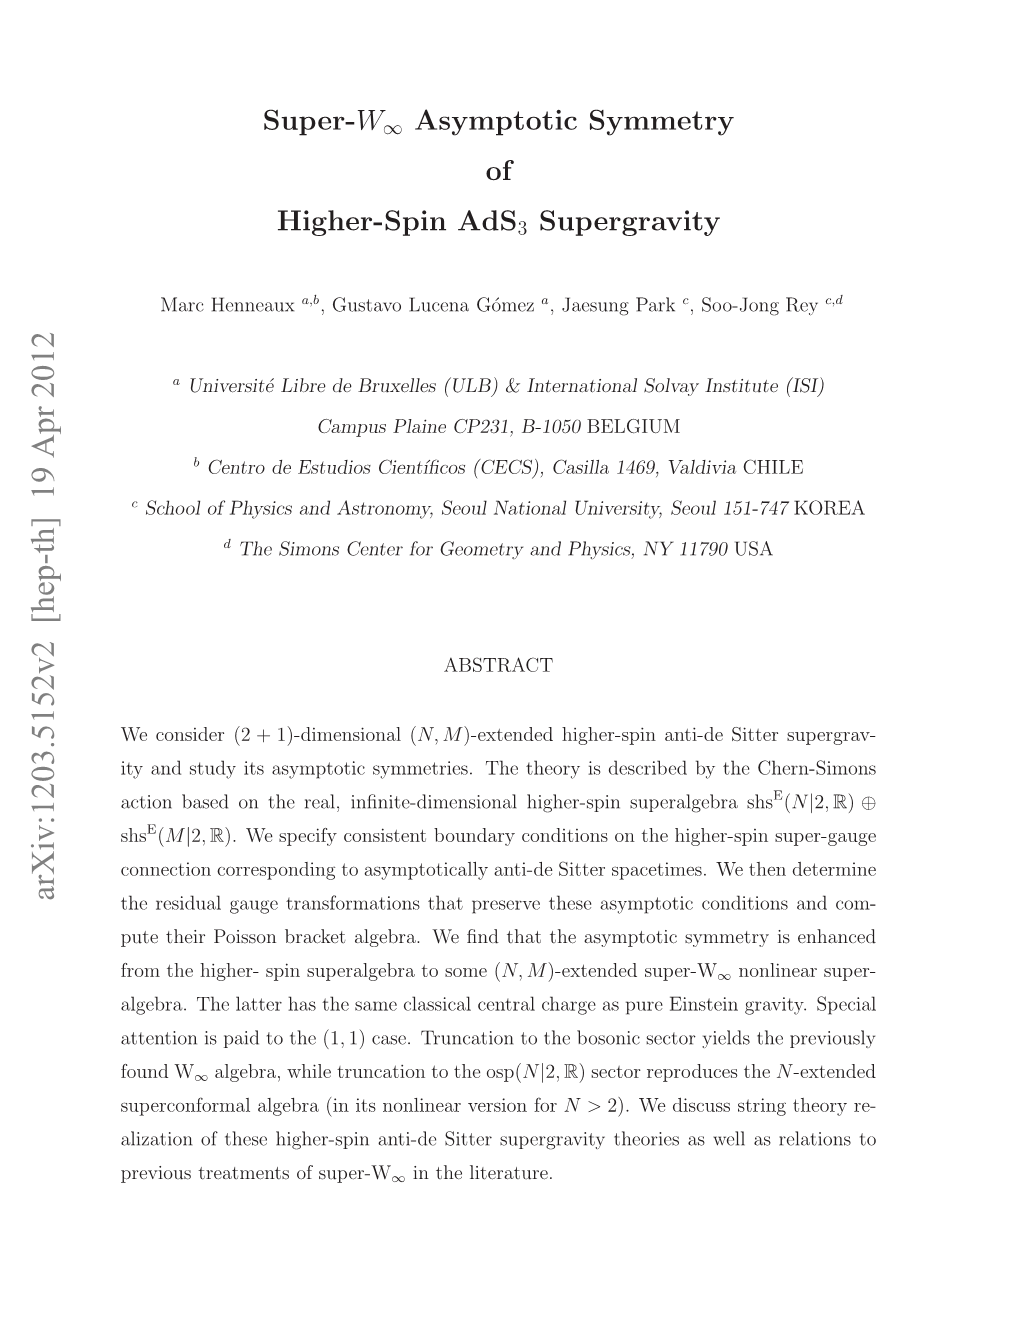 Super-W∞ Asymptotic Symmetry of Higher-Spin Ads3 Supergravity